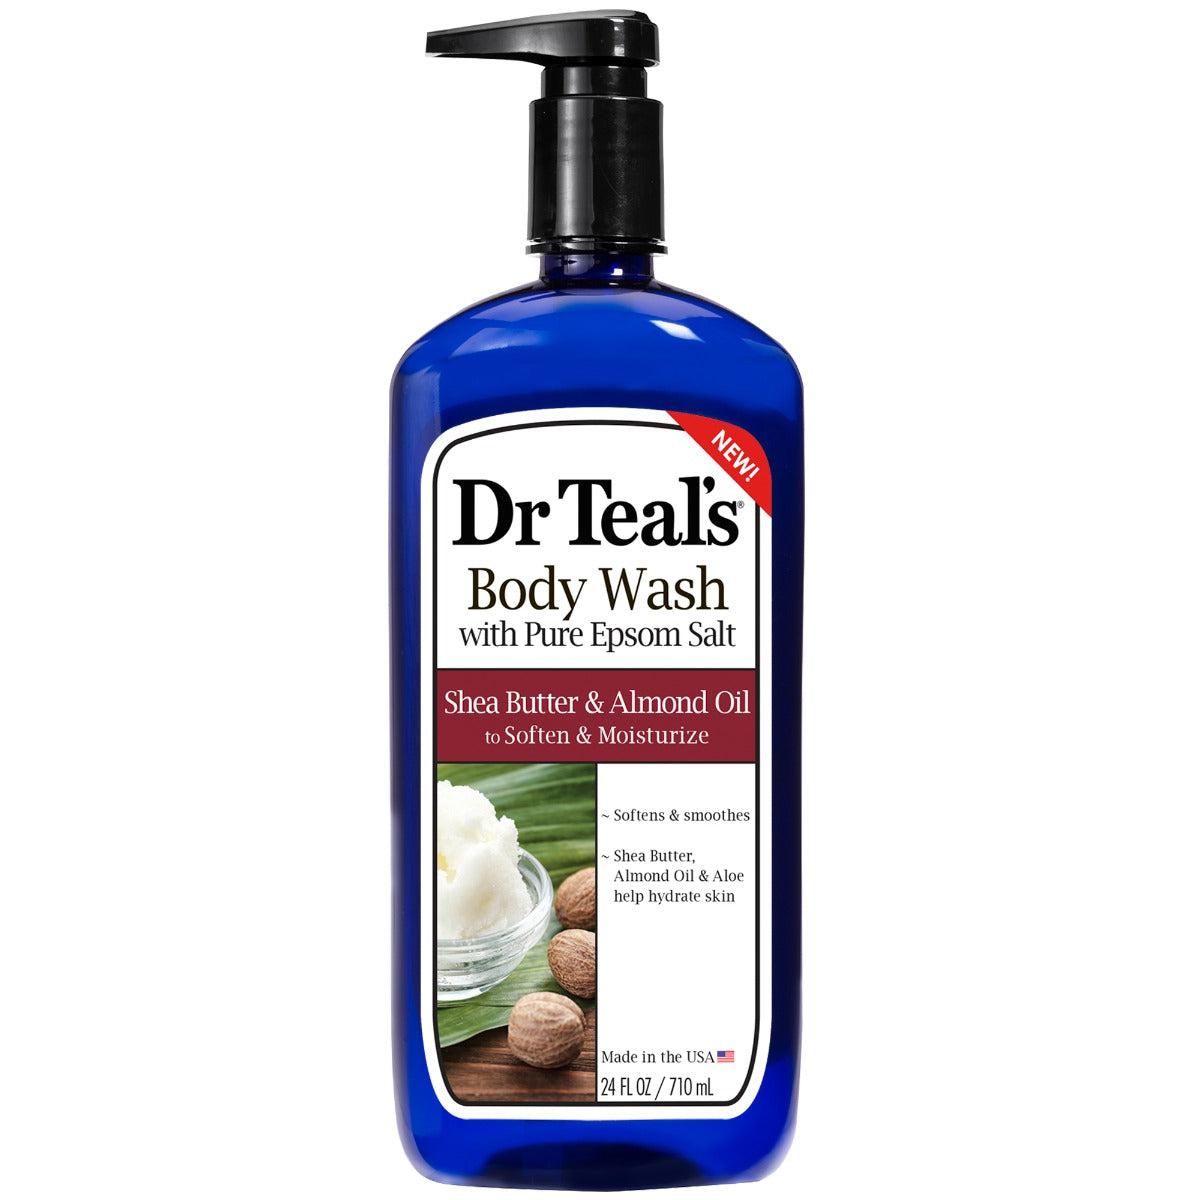 Dr Teal's Shea Butter & Almond Oil Body Wash 710ml